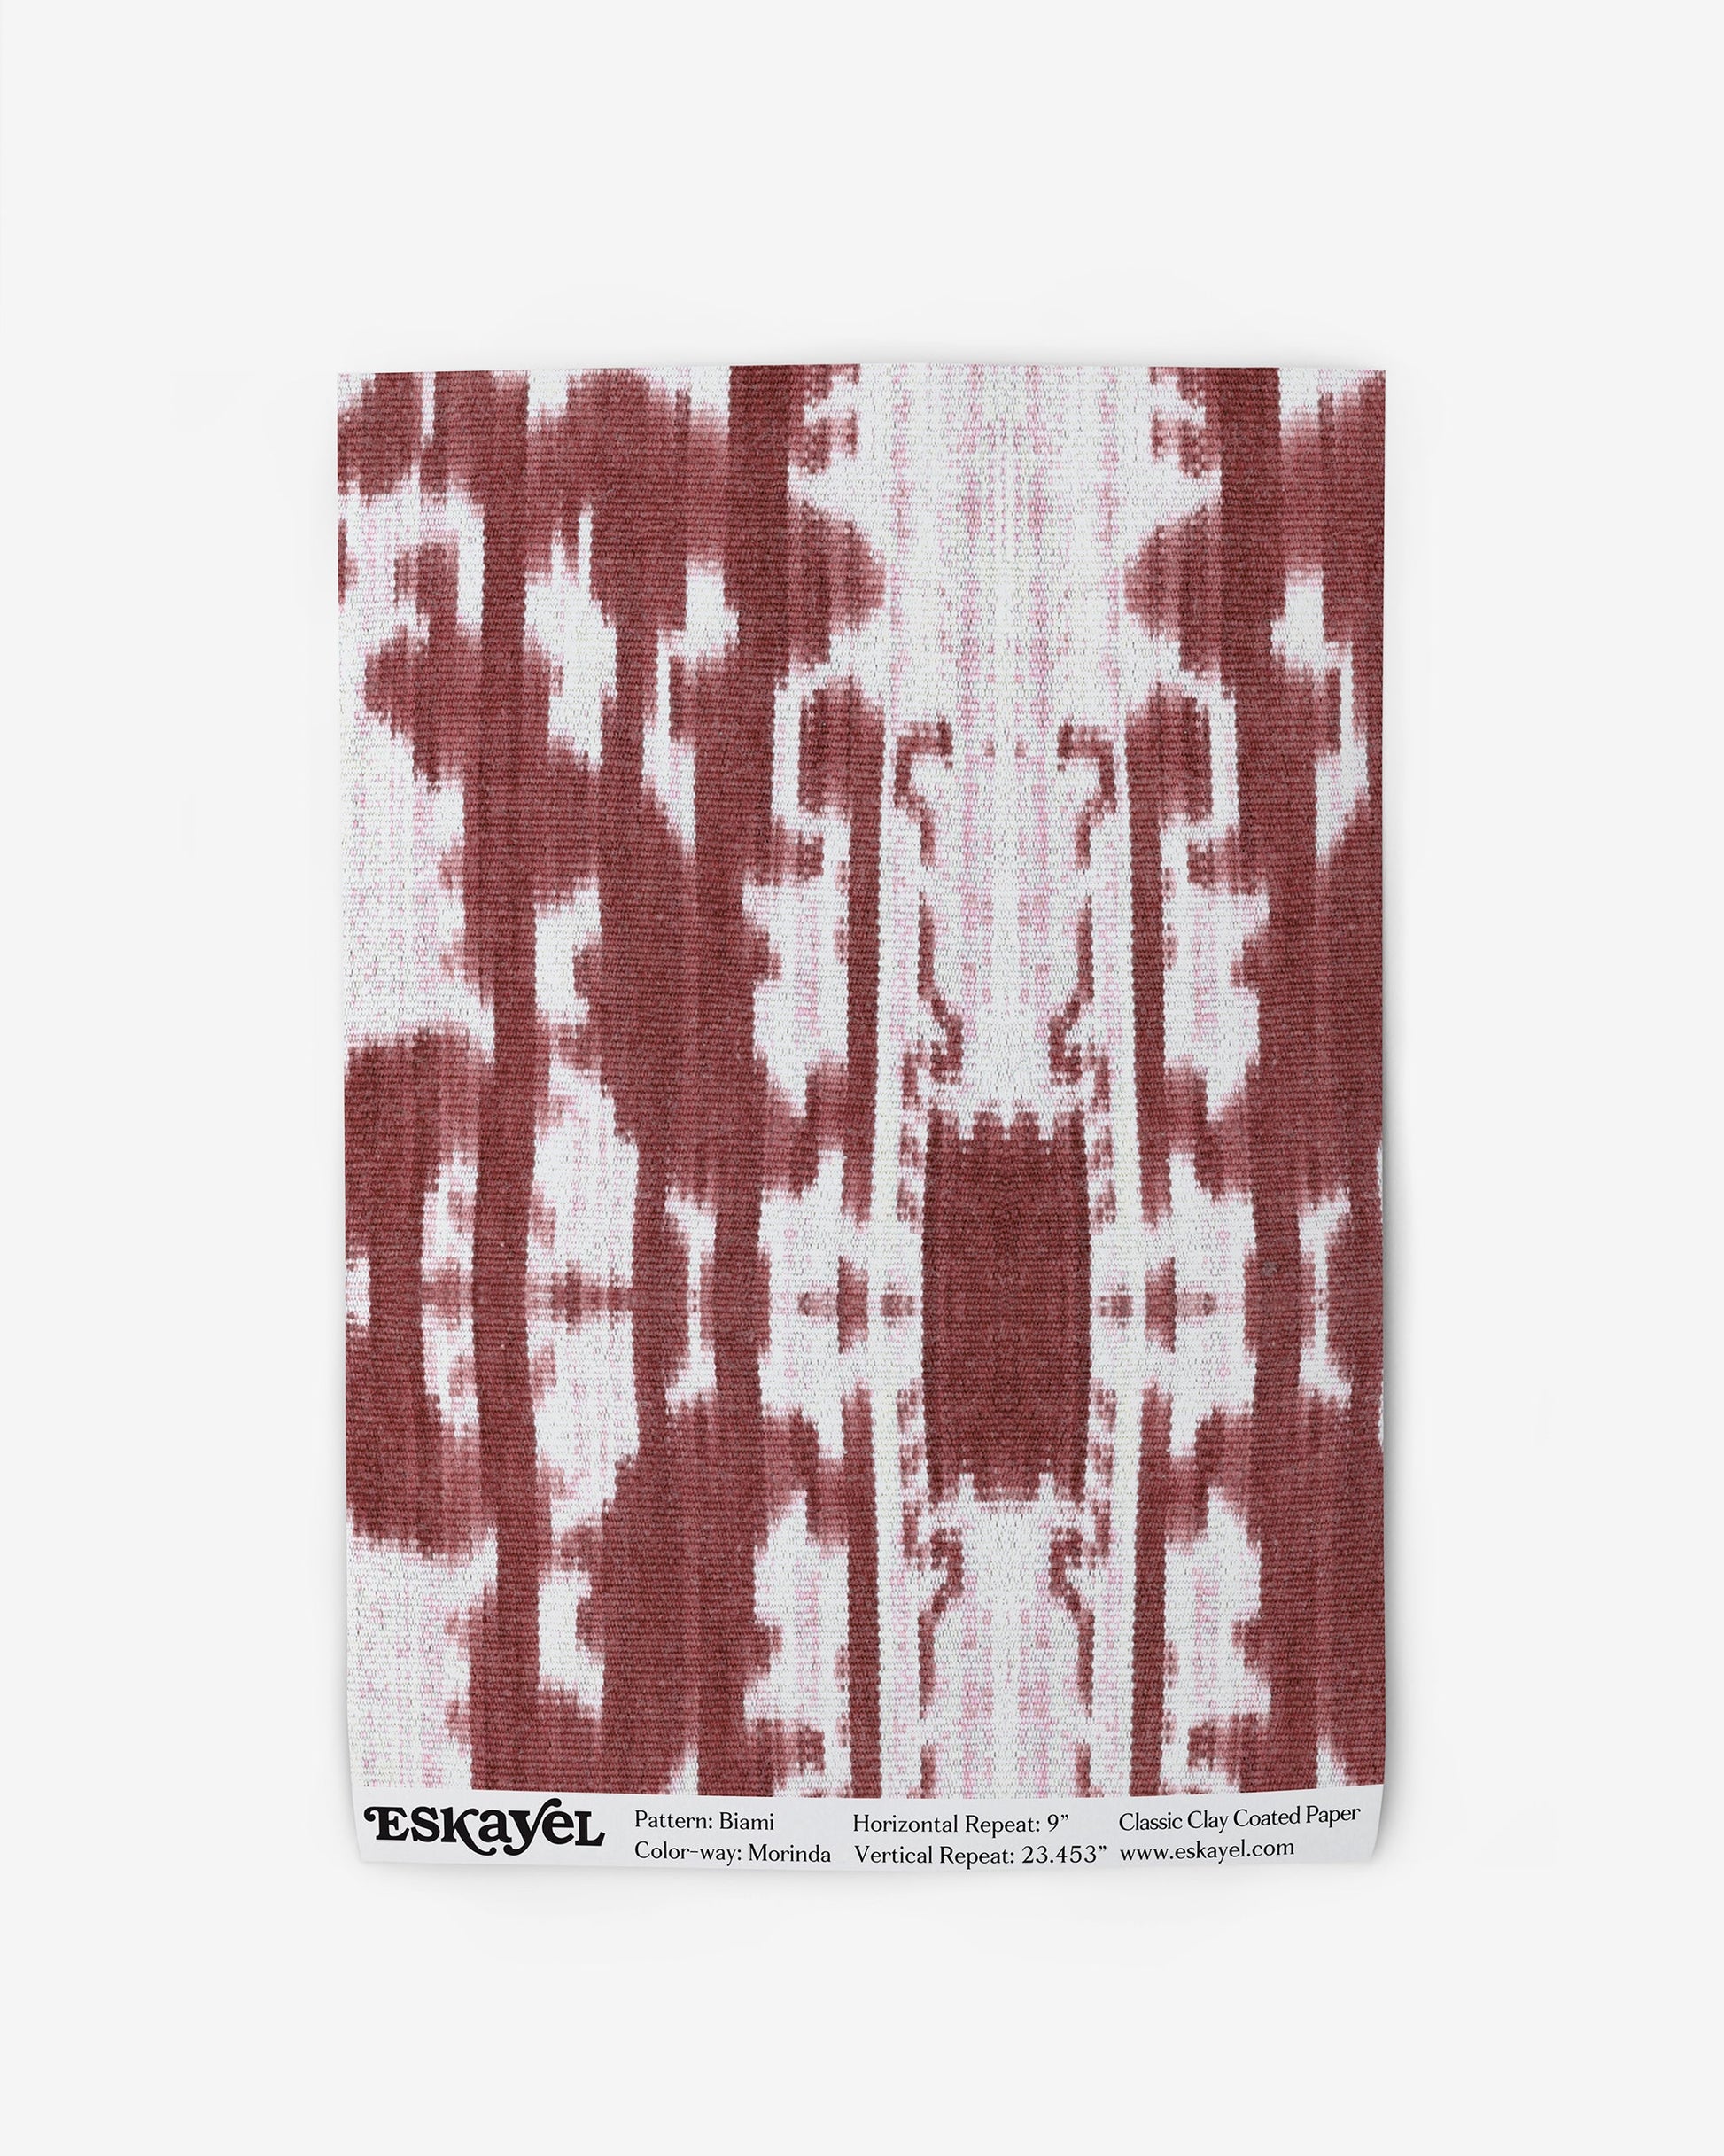 A red and white fabric with a Biami Wallpaper Sample Morinda Ikat pattern on it